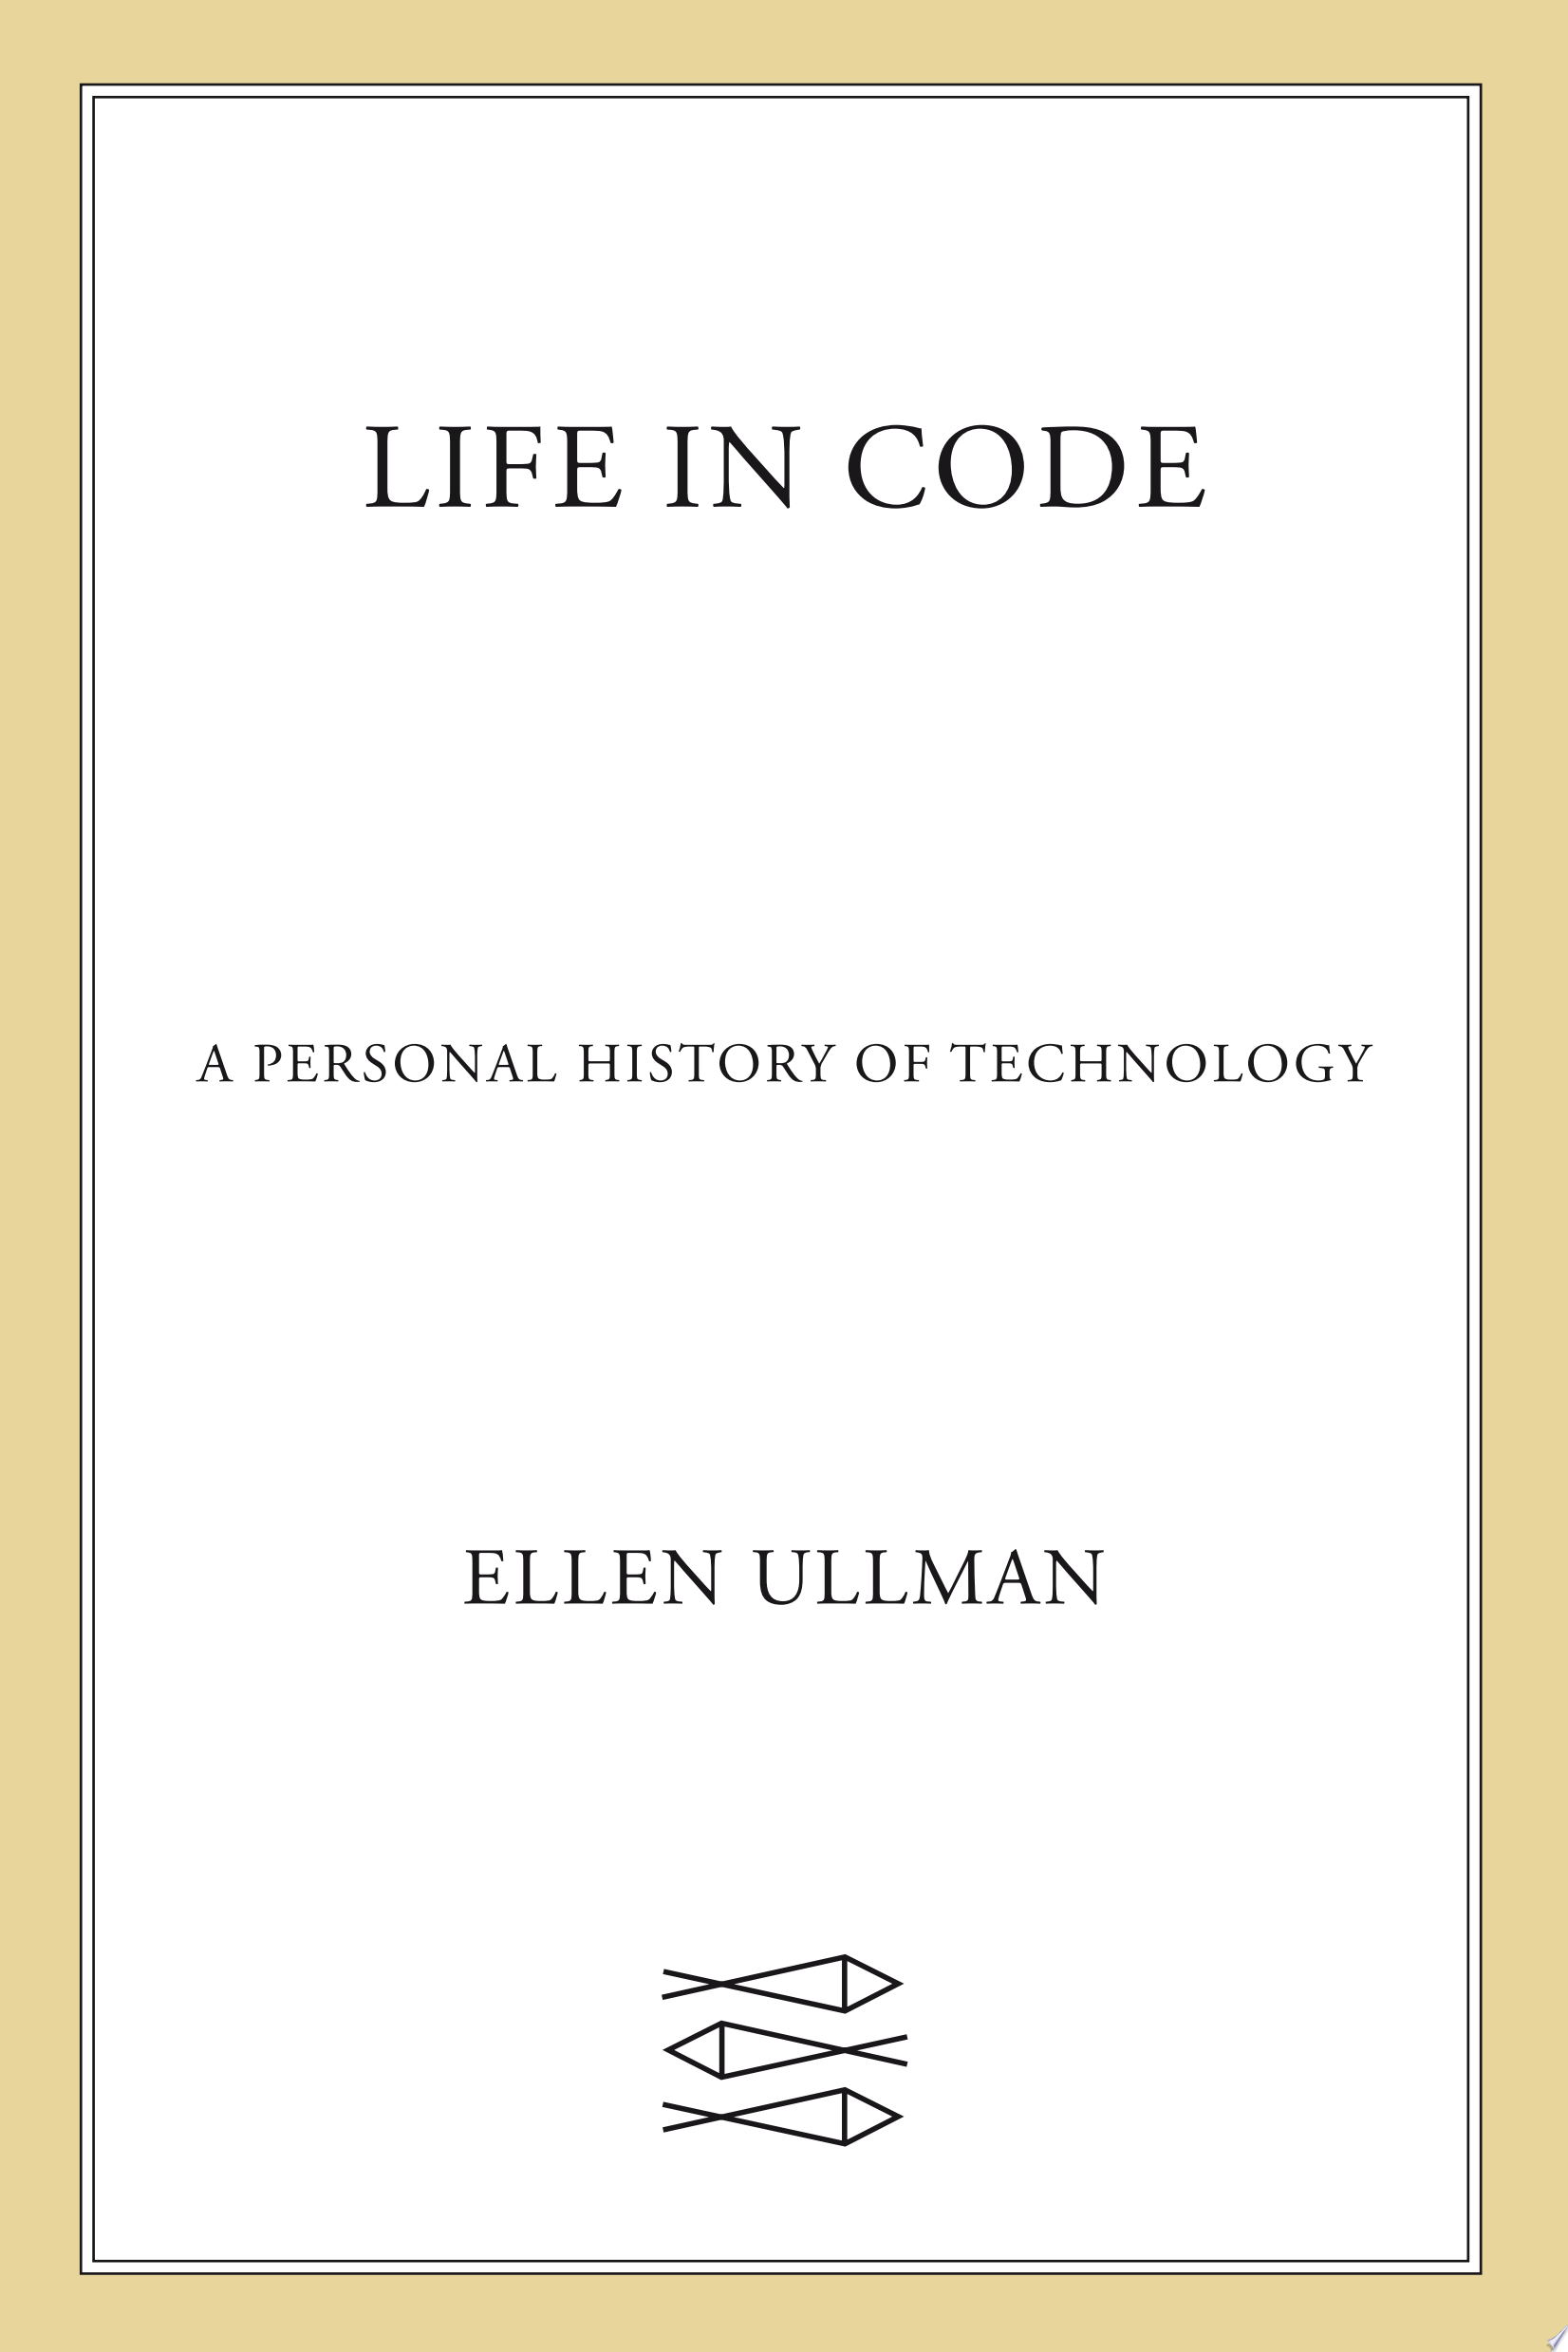 Image for "Life in Code"